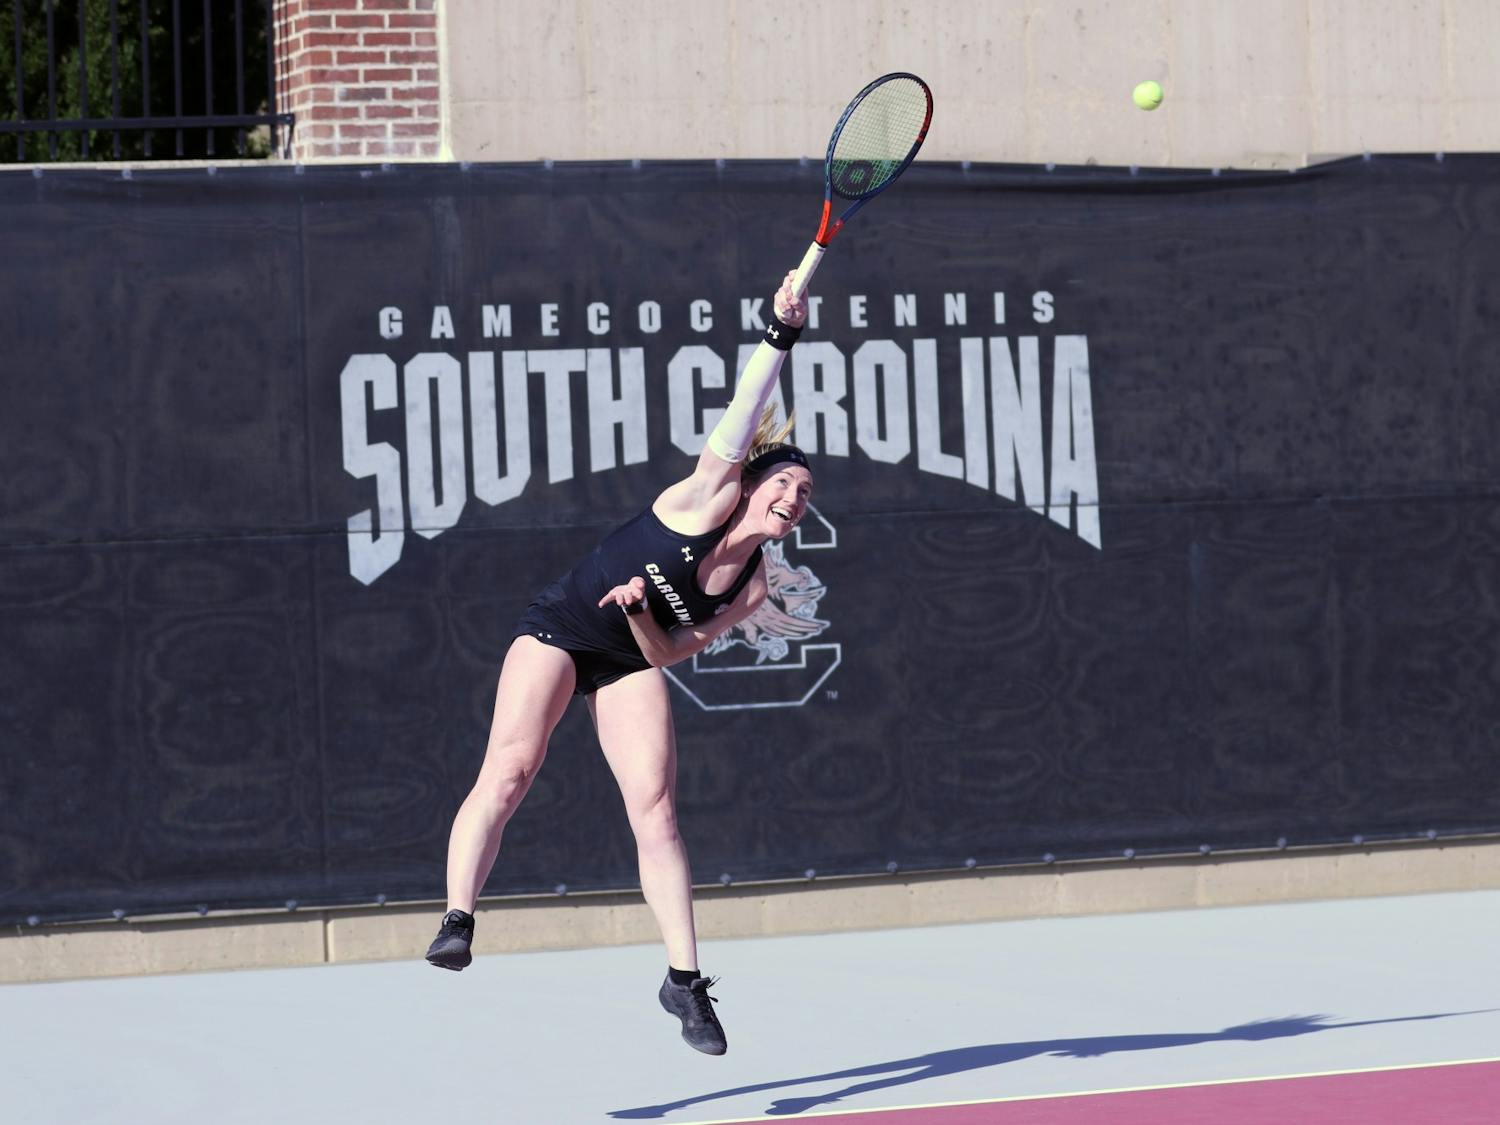 Gamecock freshman Emma Shelton runs to hit a shot during her match against Clemson on Jan. 30, 2020. Overall, the Gamecocks defeated Clemson 6-1.